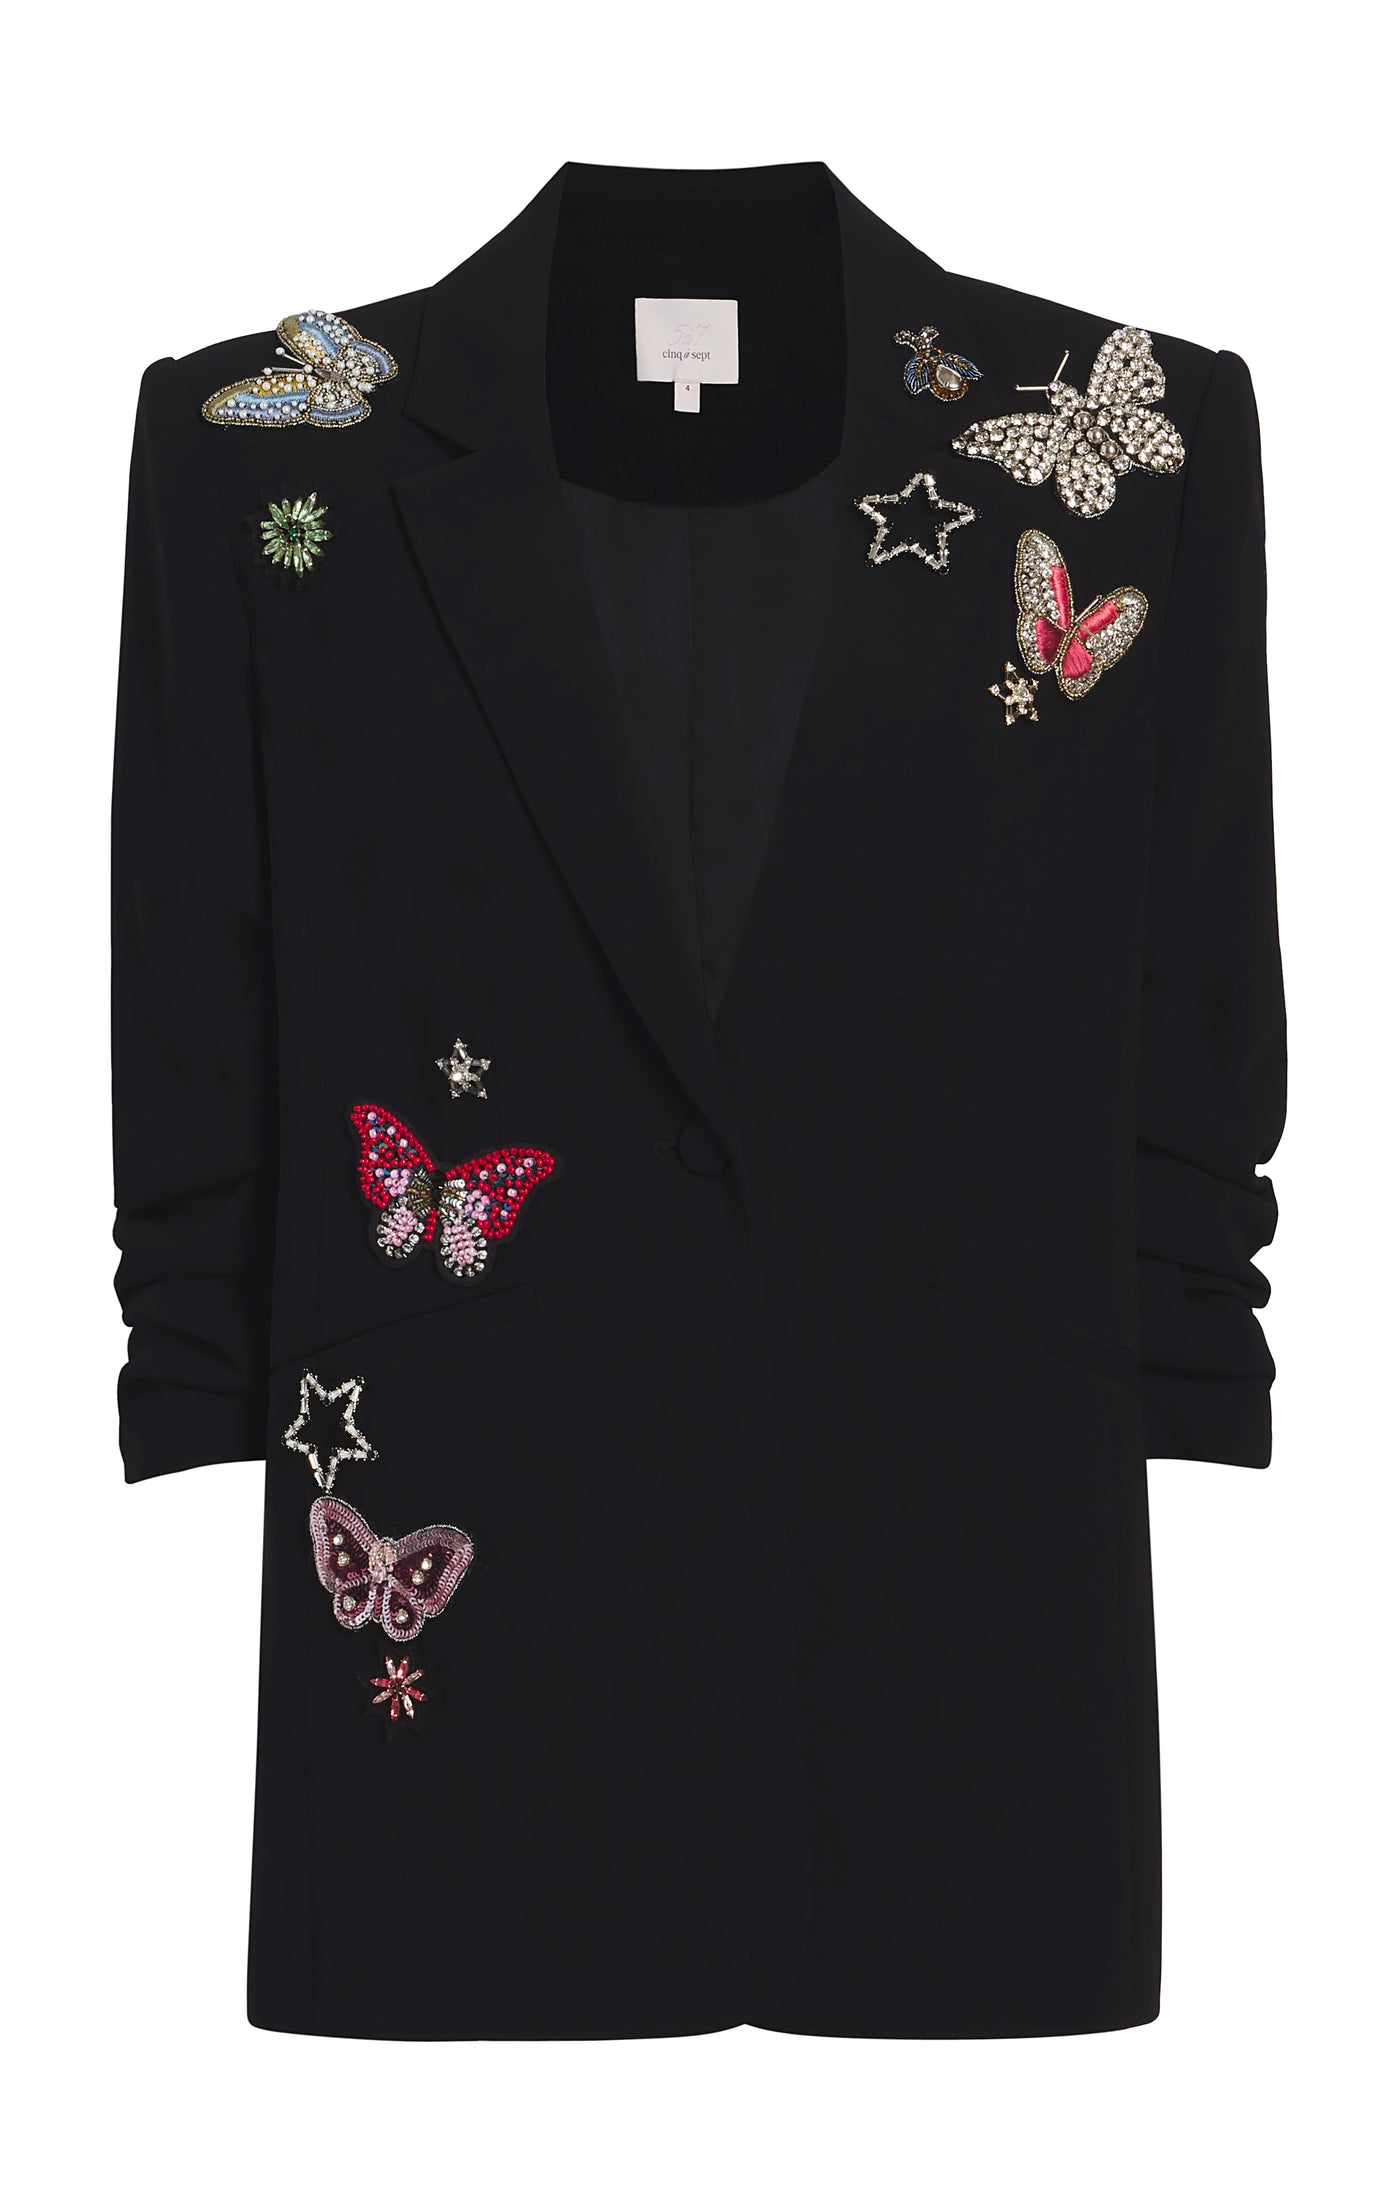 Butterfly Embellished Kylie Jacket